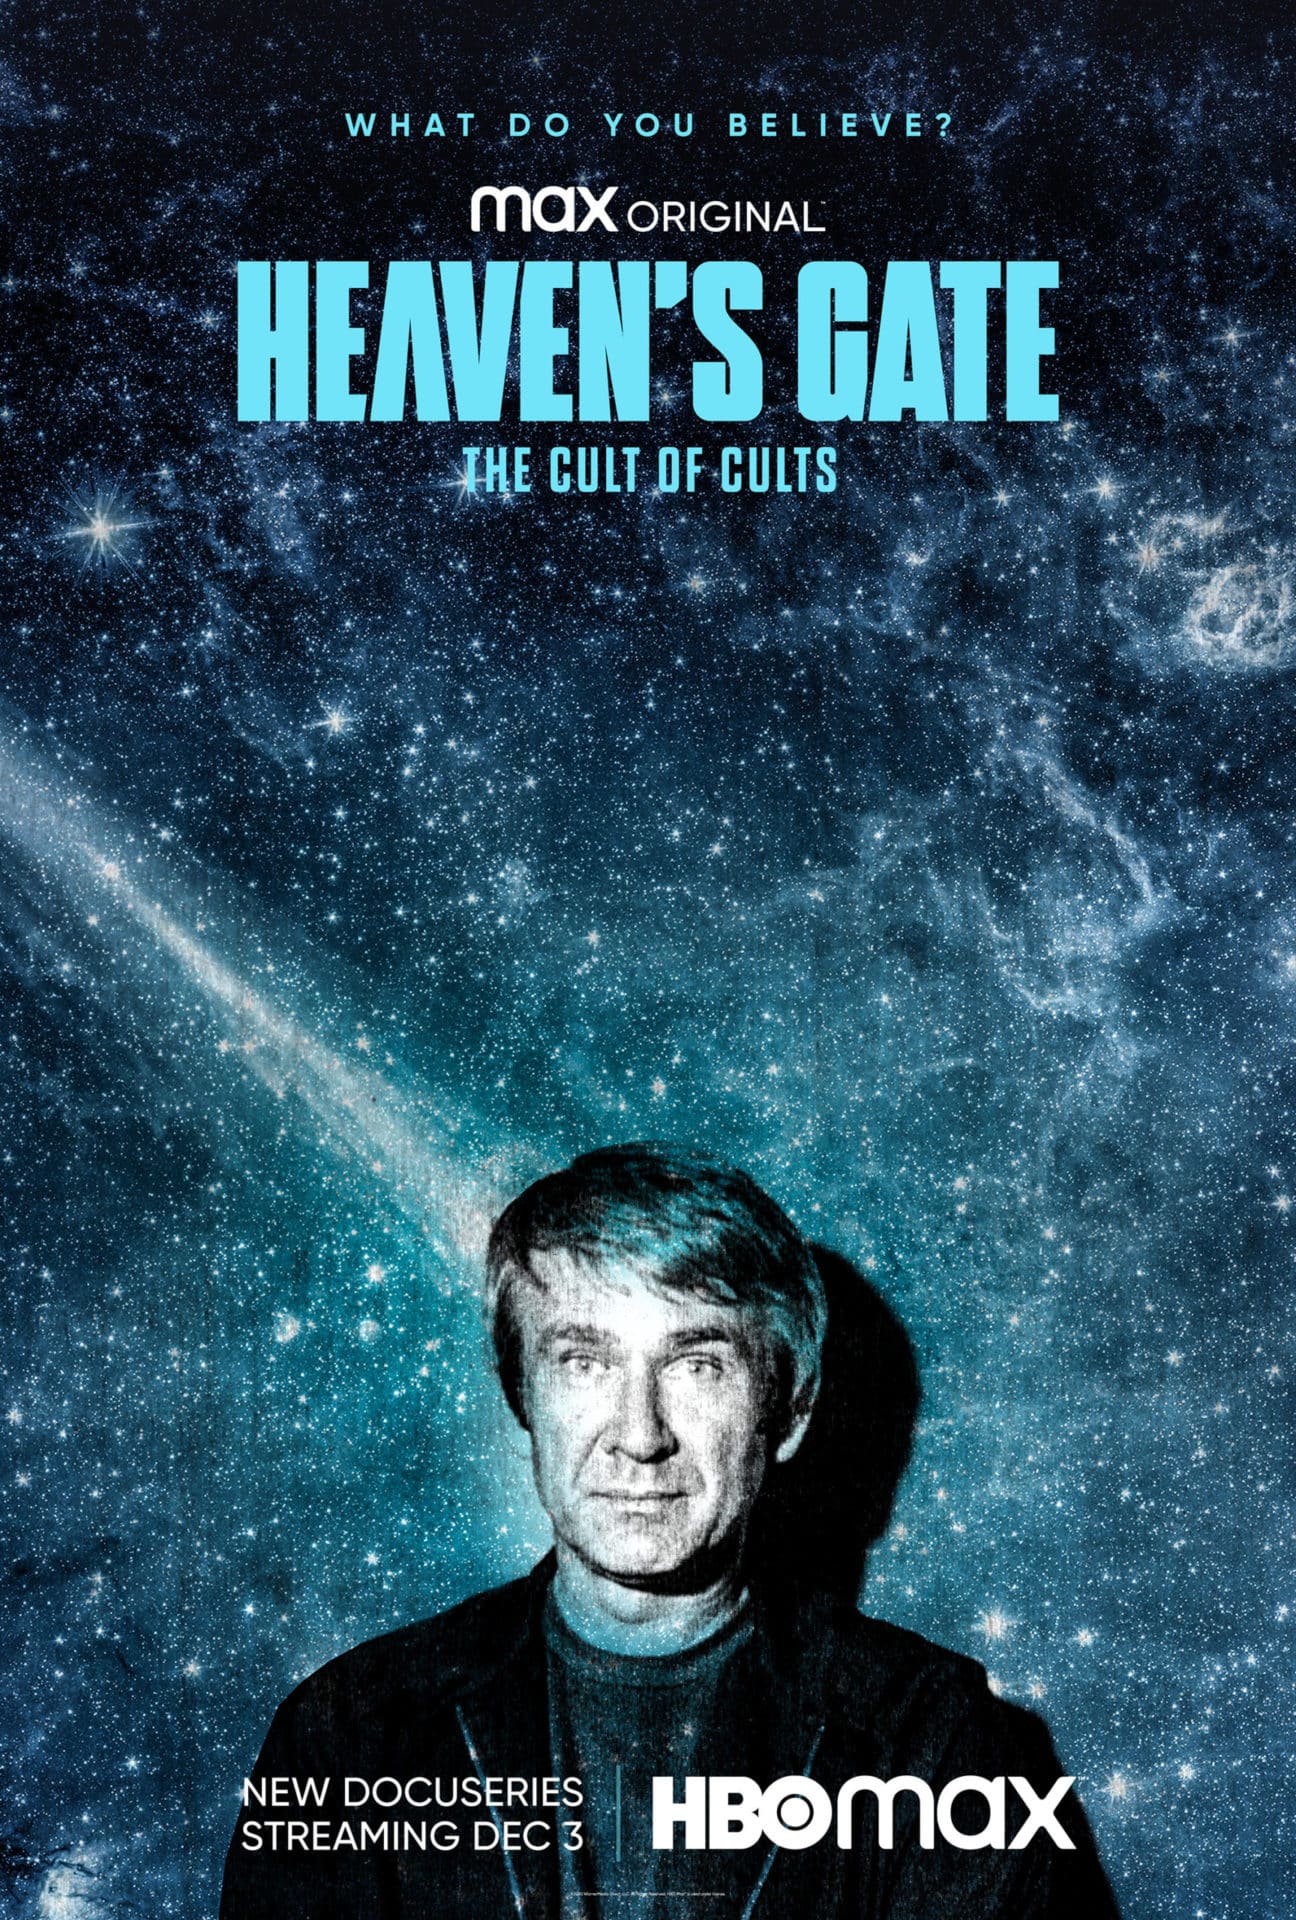 Heaven's Gate The Cult of Cults Early Review